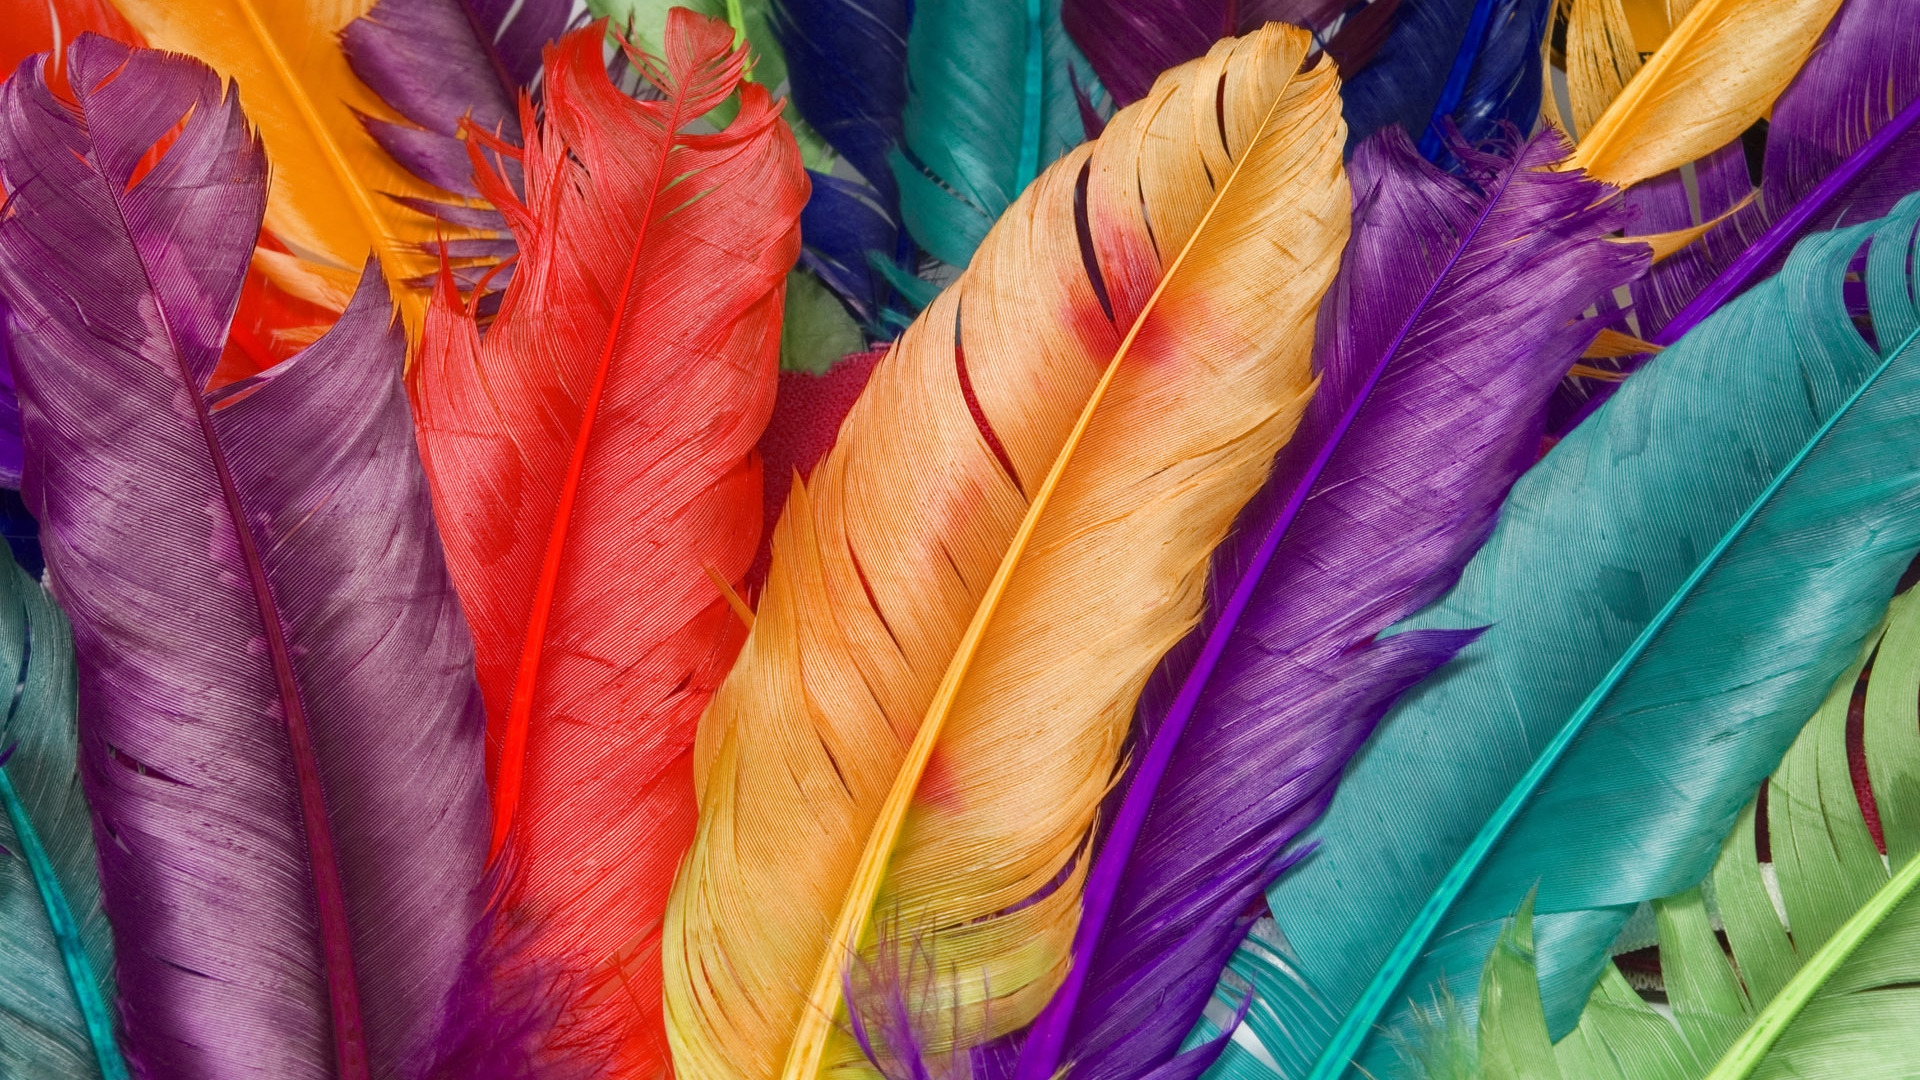 Colored Feathers for 1920 x 1080 HDTV 1080p resolution